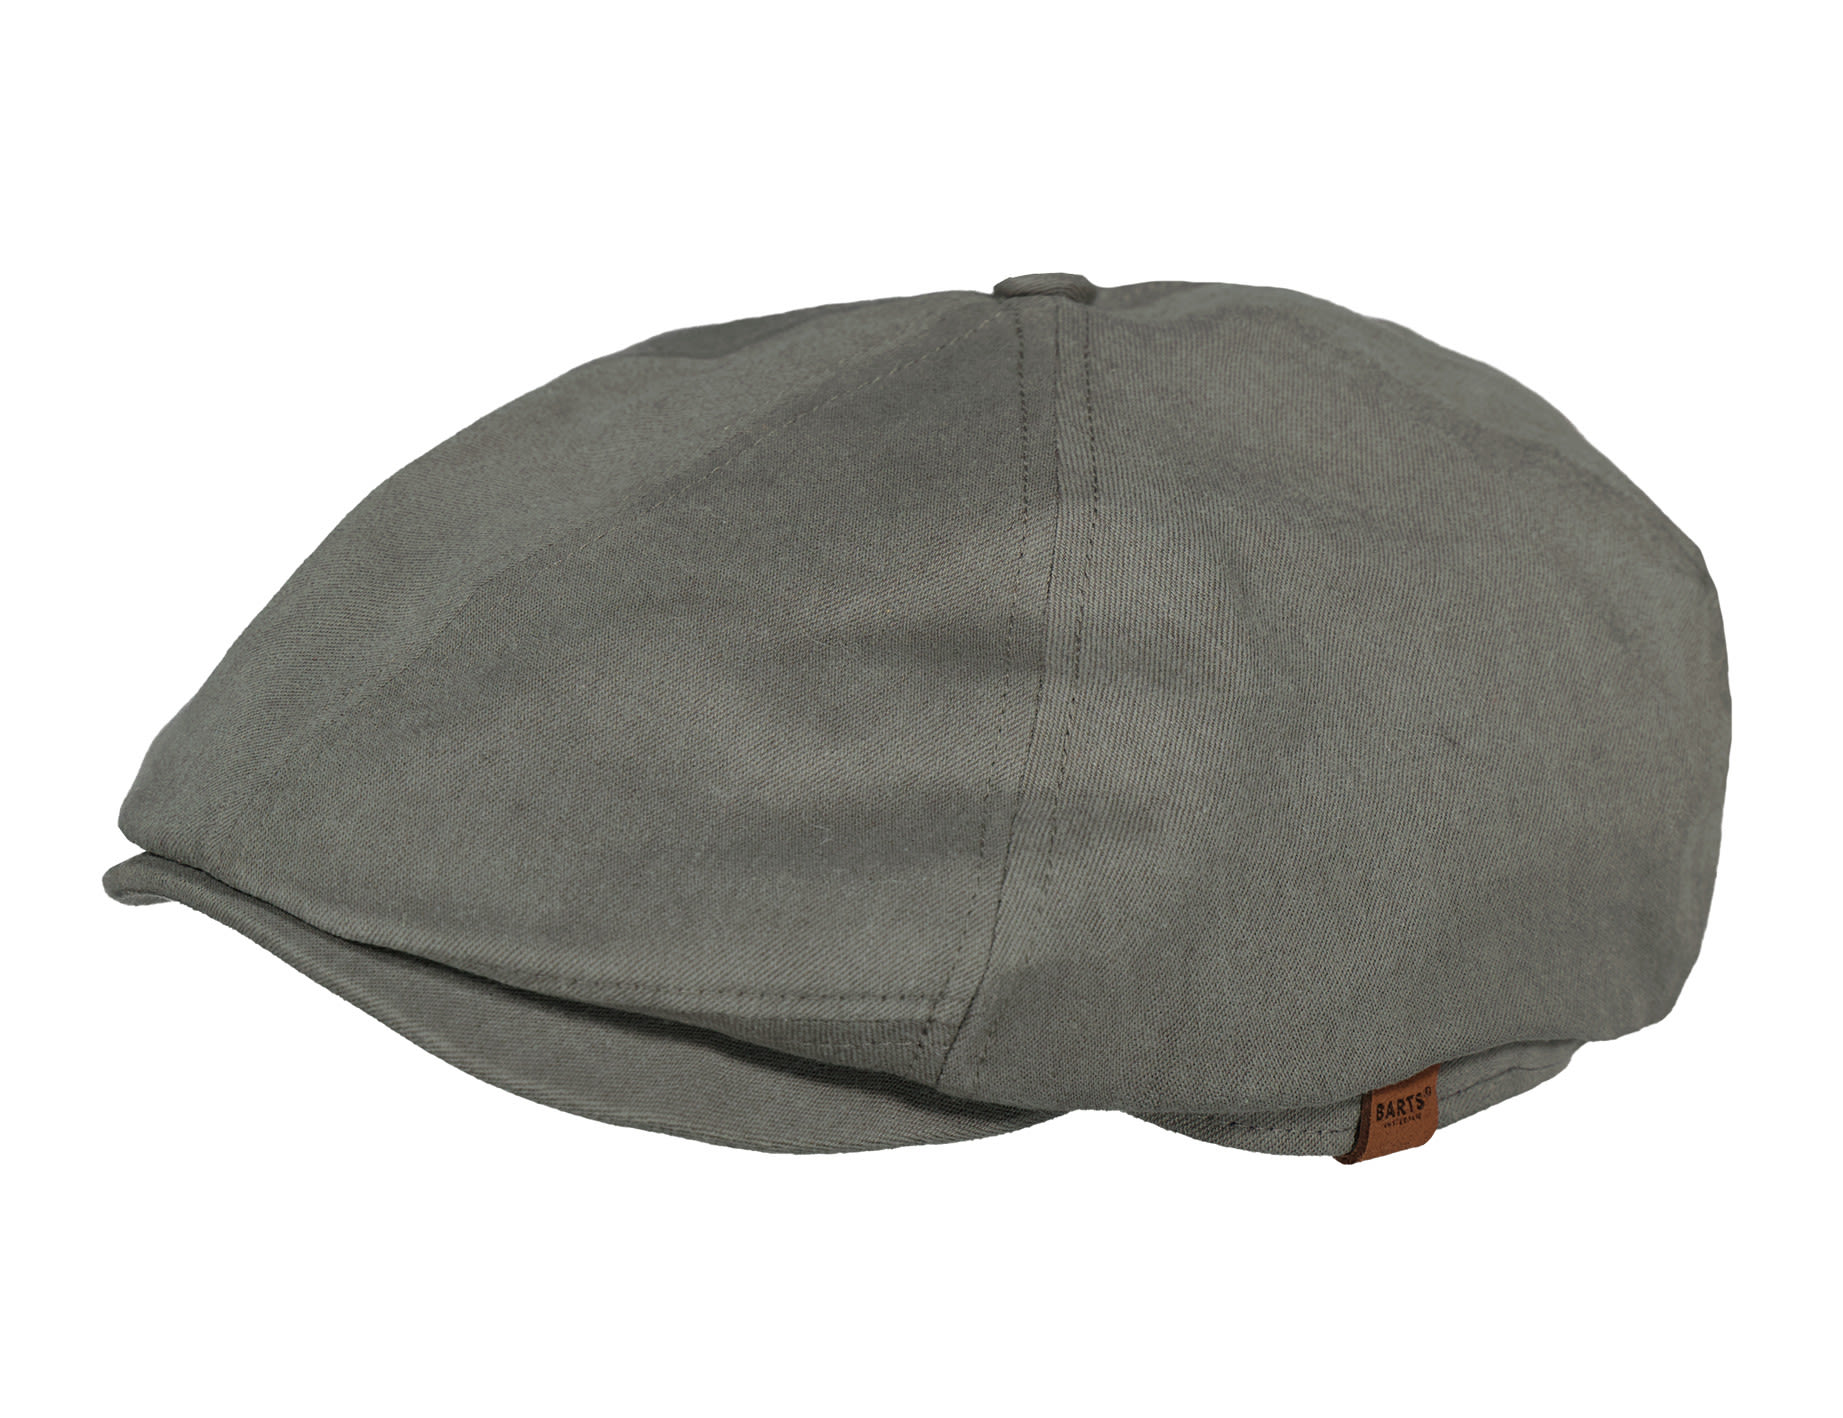 Barts Lower Prices Prices - soft Online Shopping at Mens stylish cap. Discounted